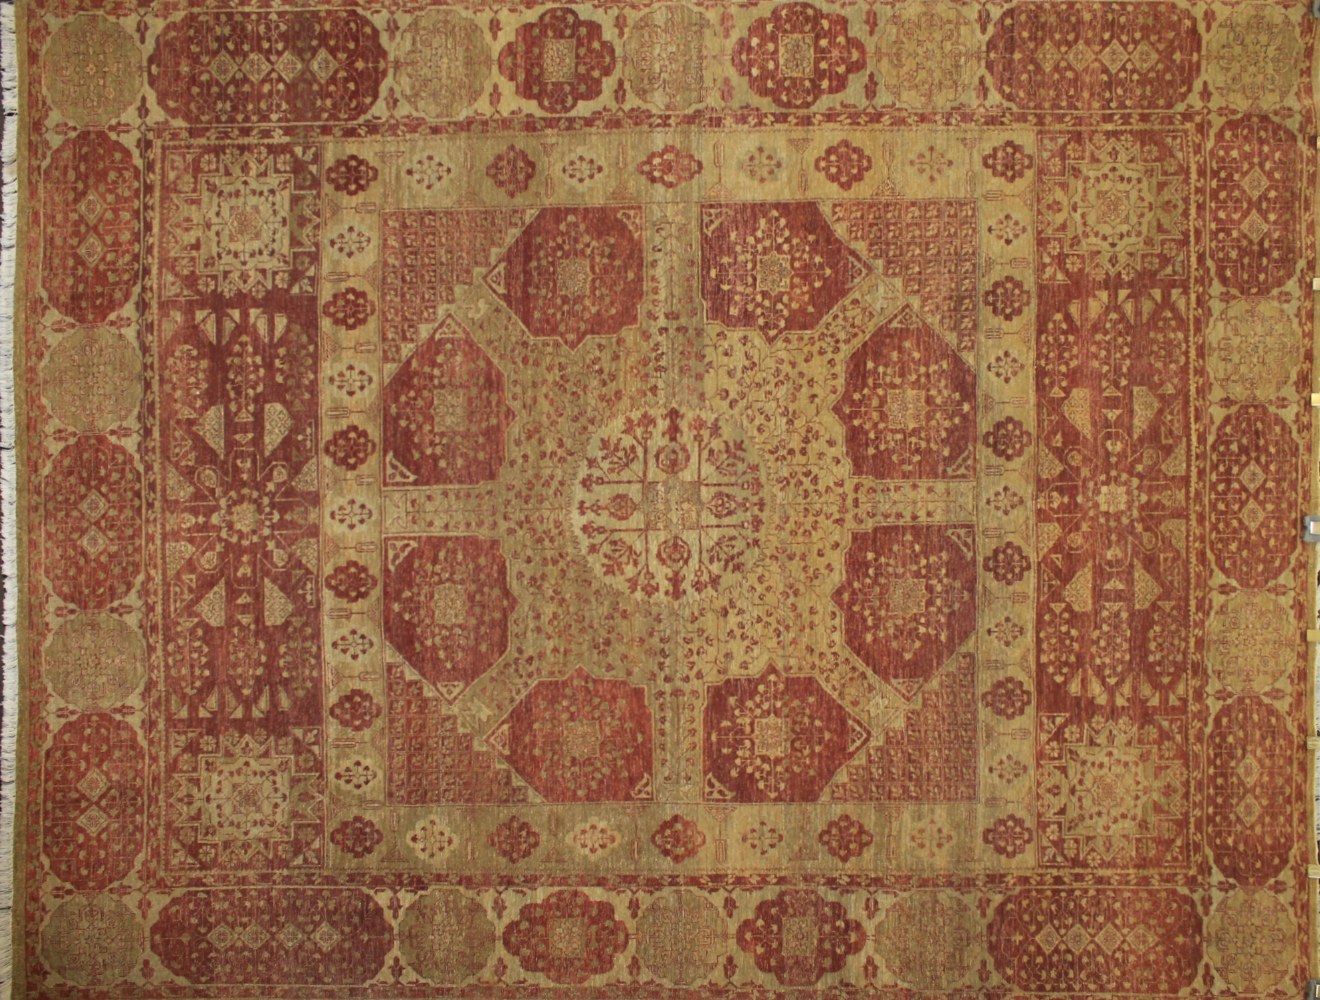 9x12 Antique Revival Hand Knotted Wool Area Rug - MR9034